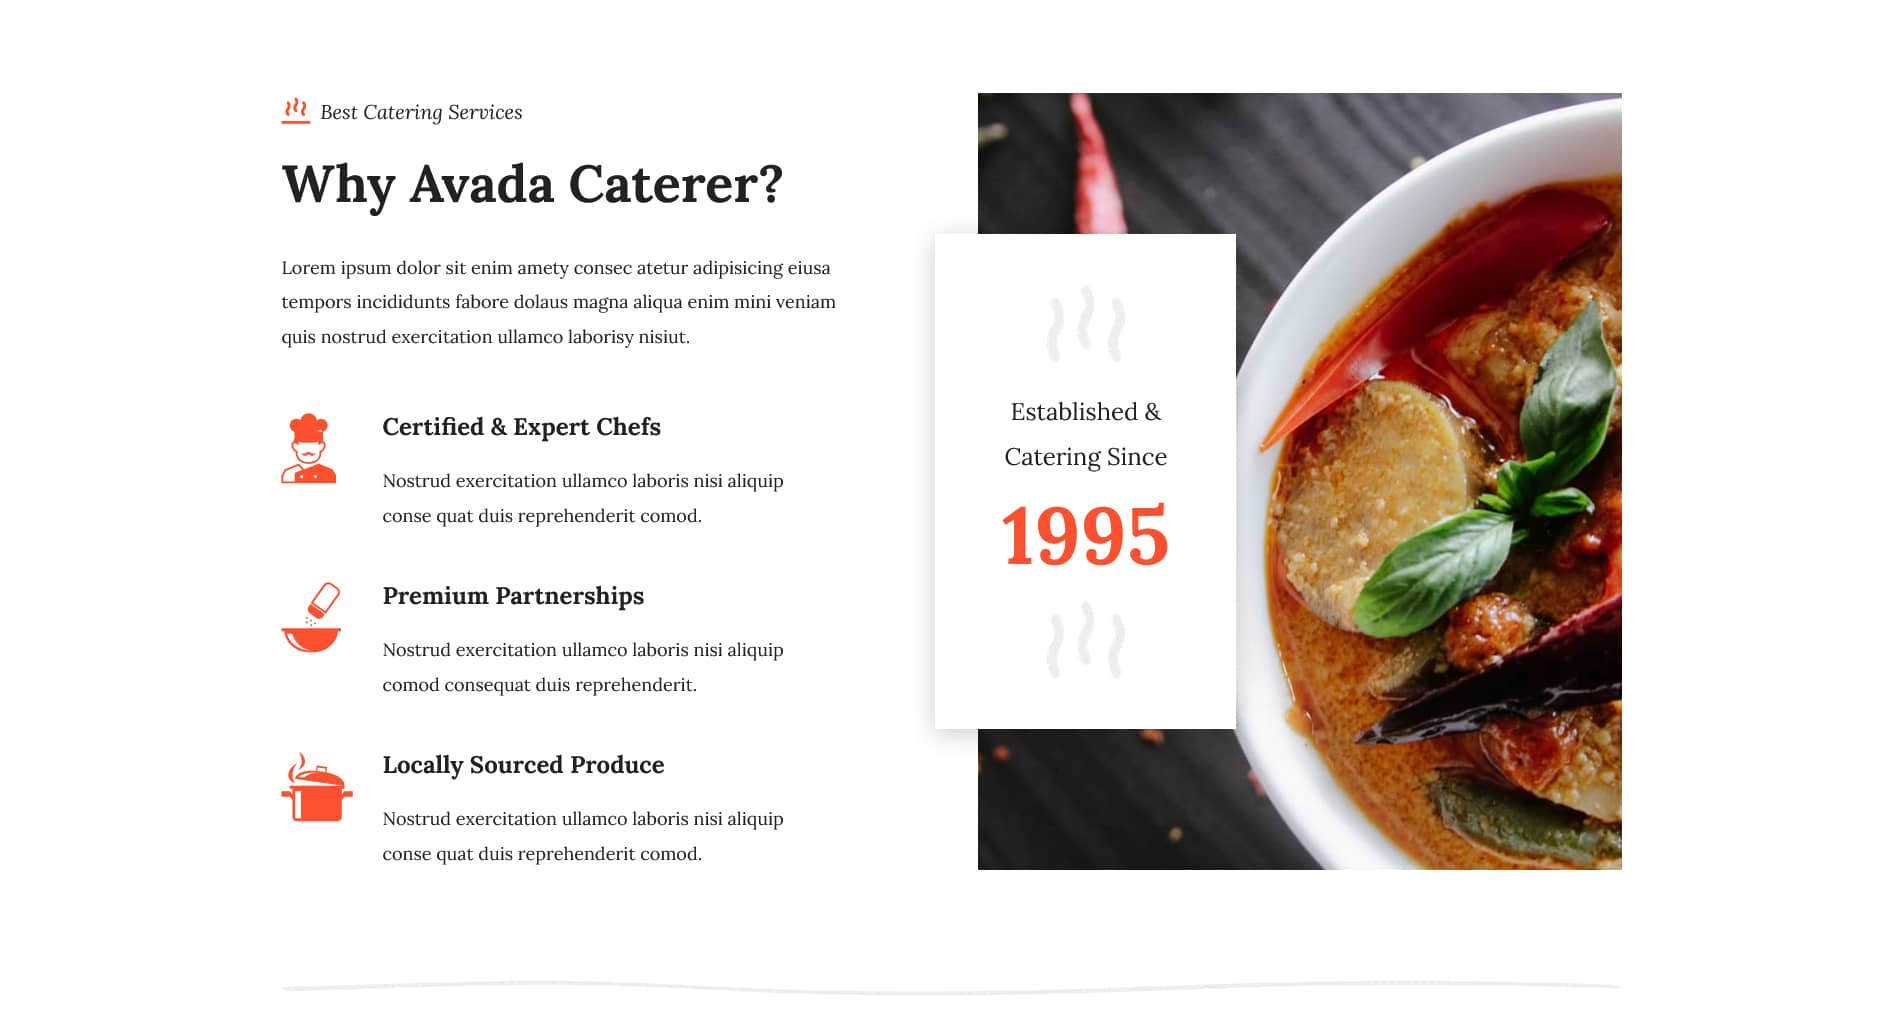 Avada Caterer Why Choose Us